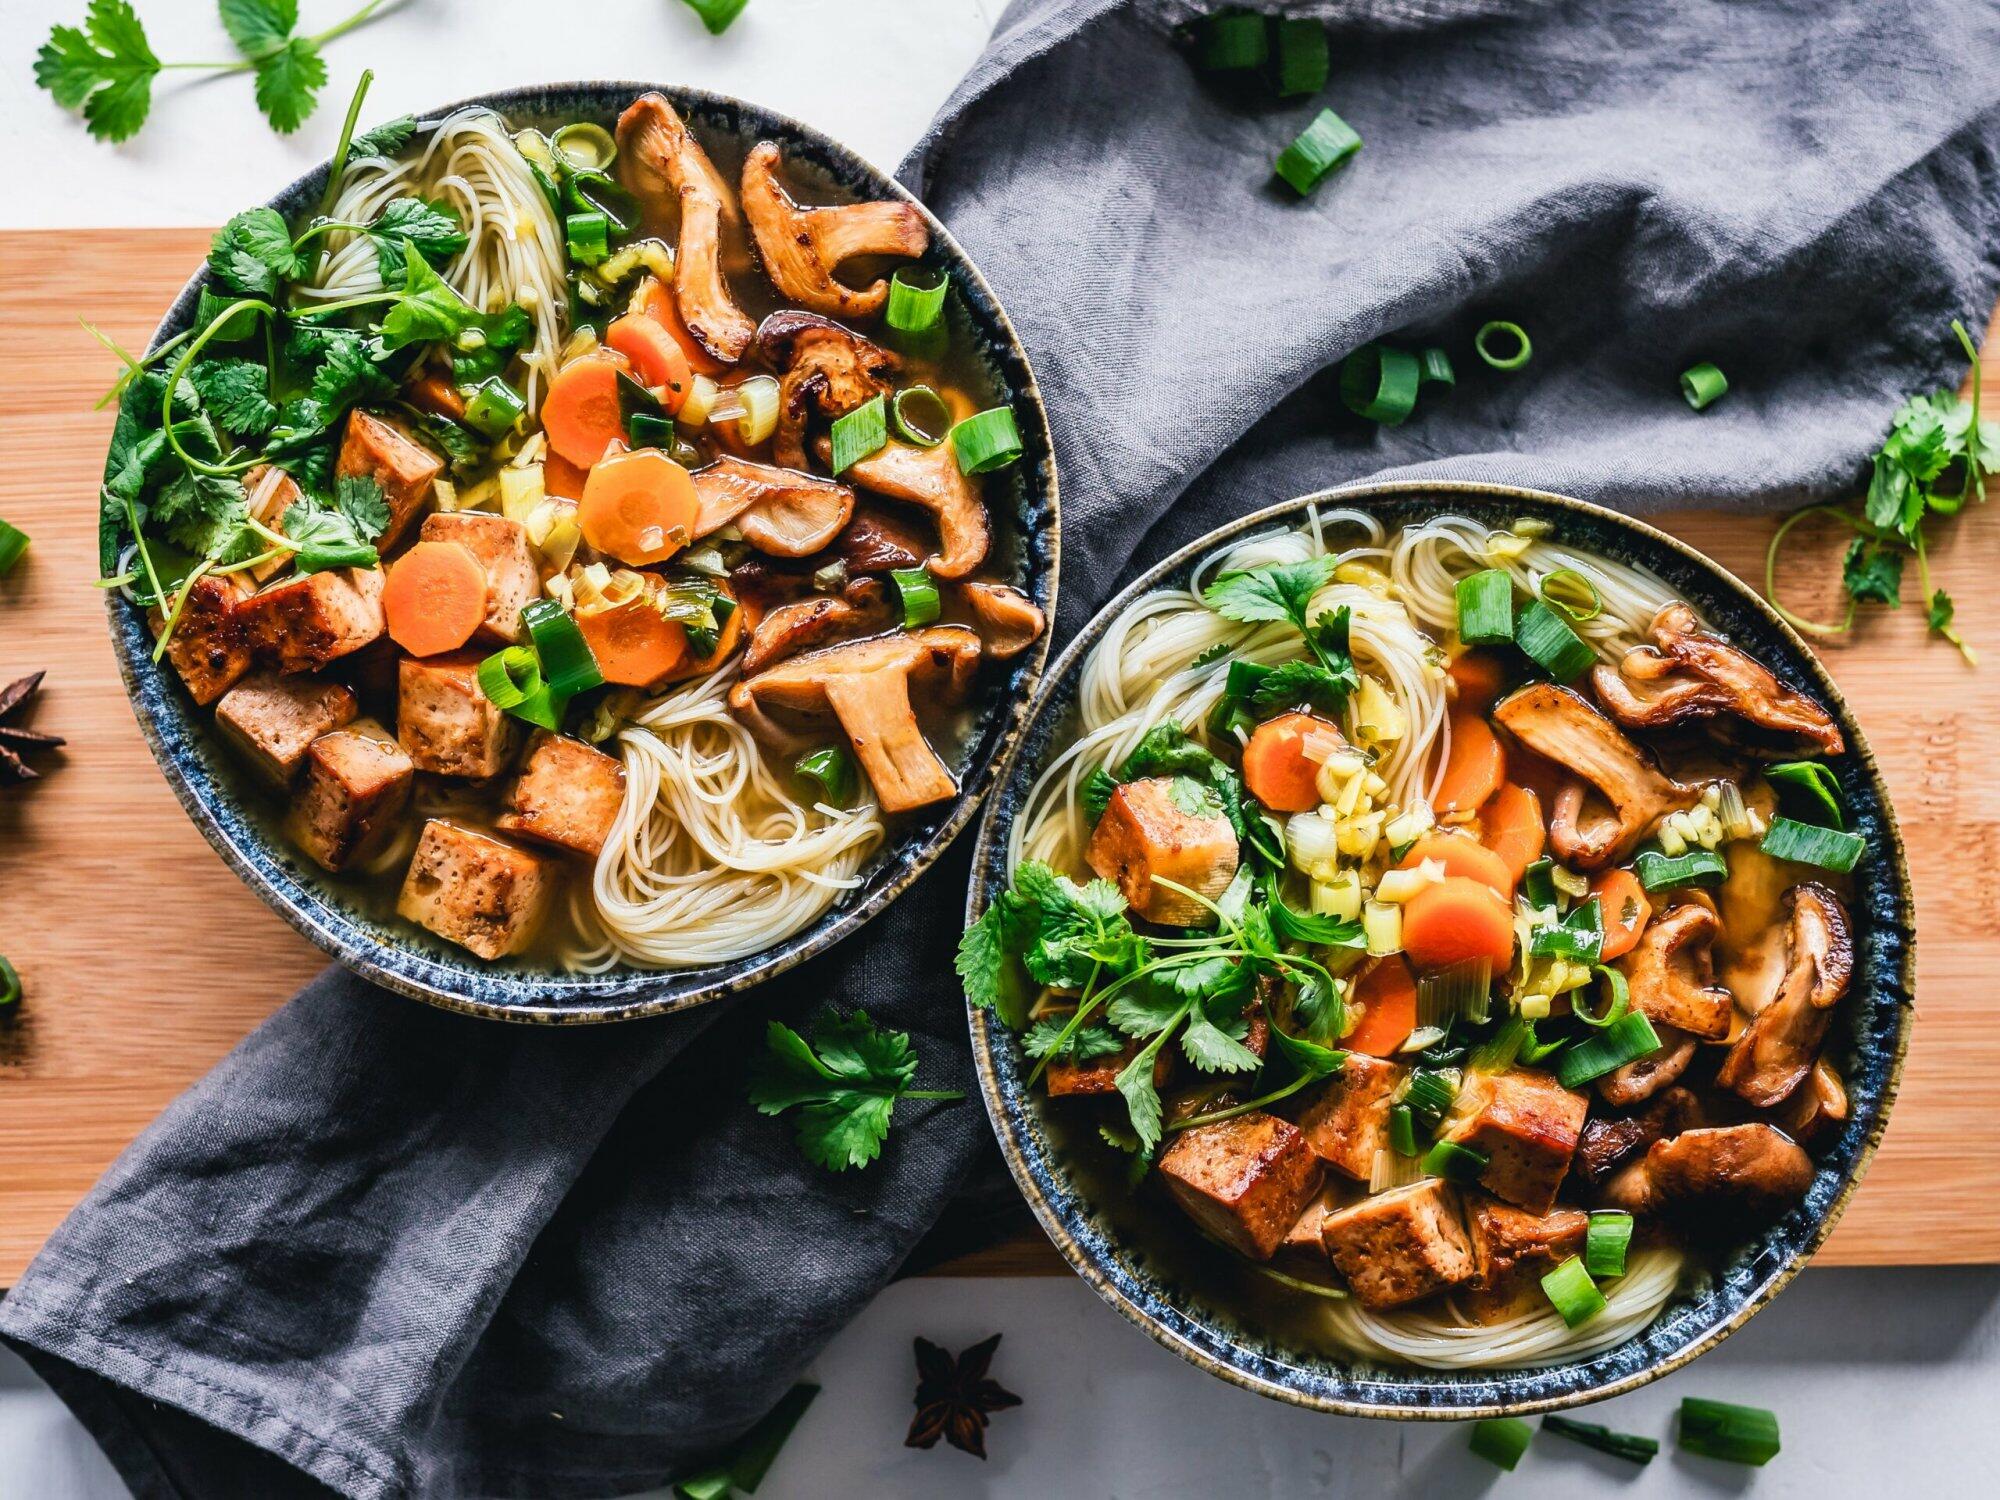 Strengthen Your Immune System with Mushrooms